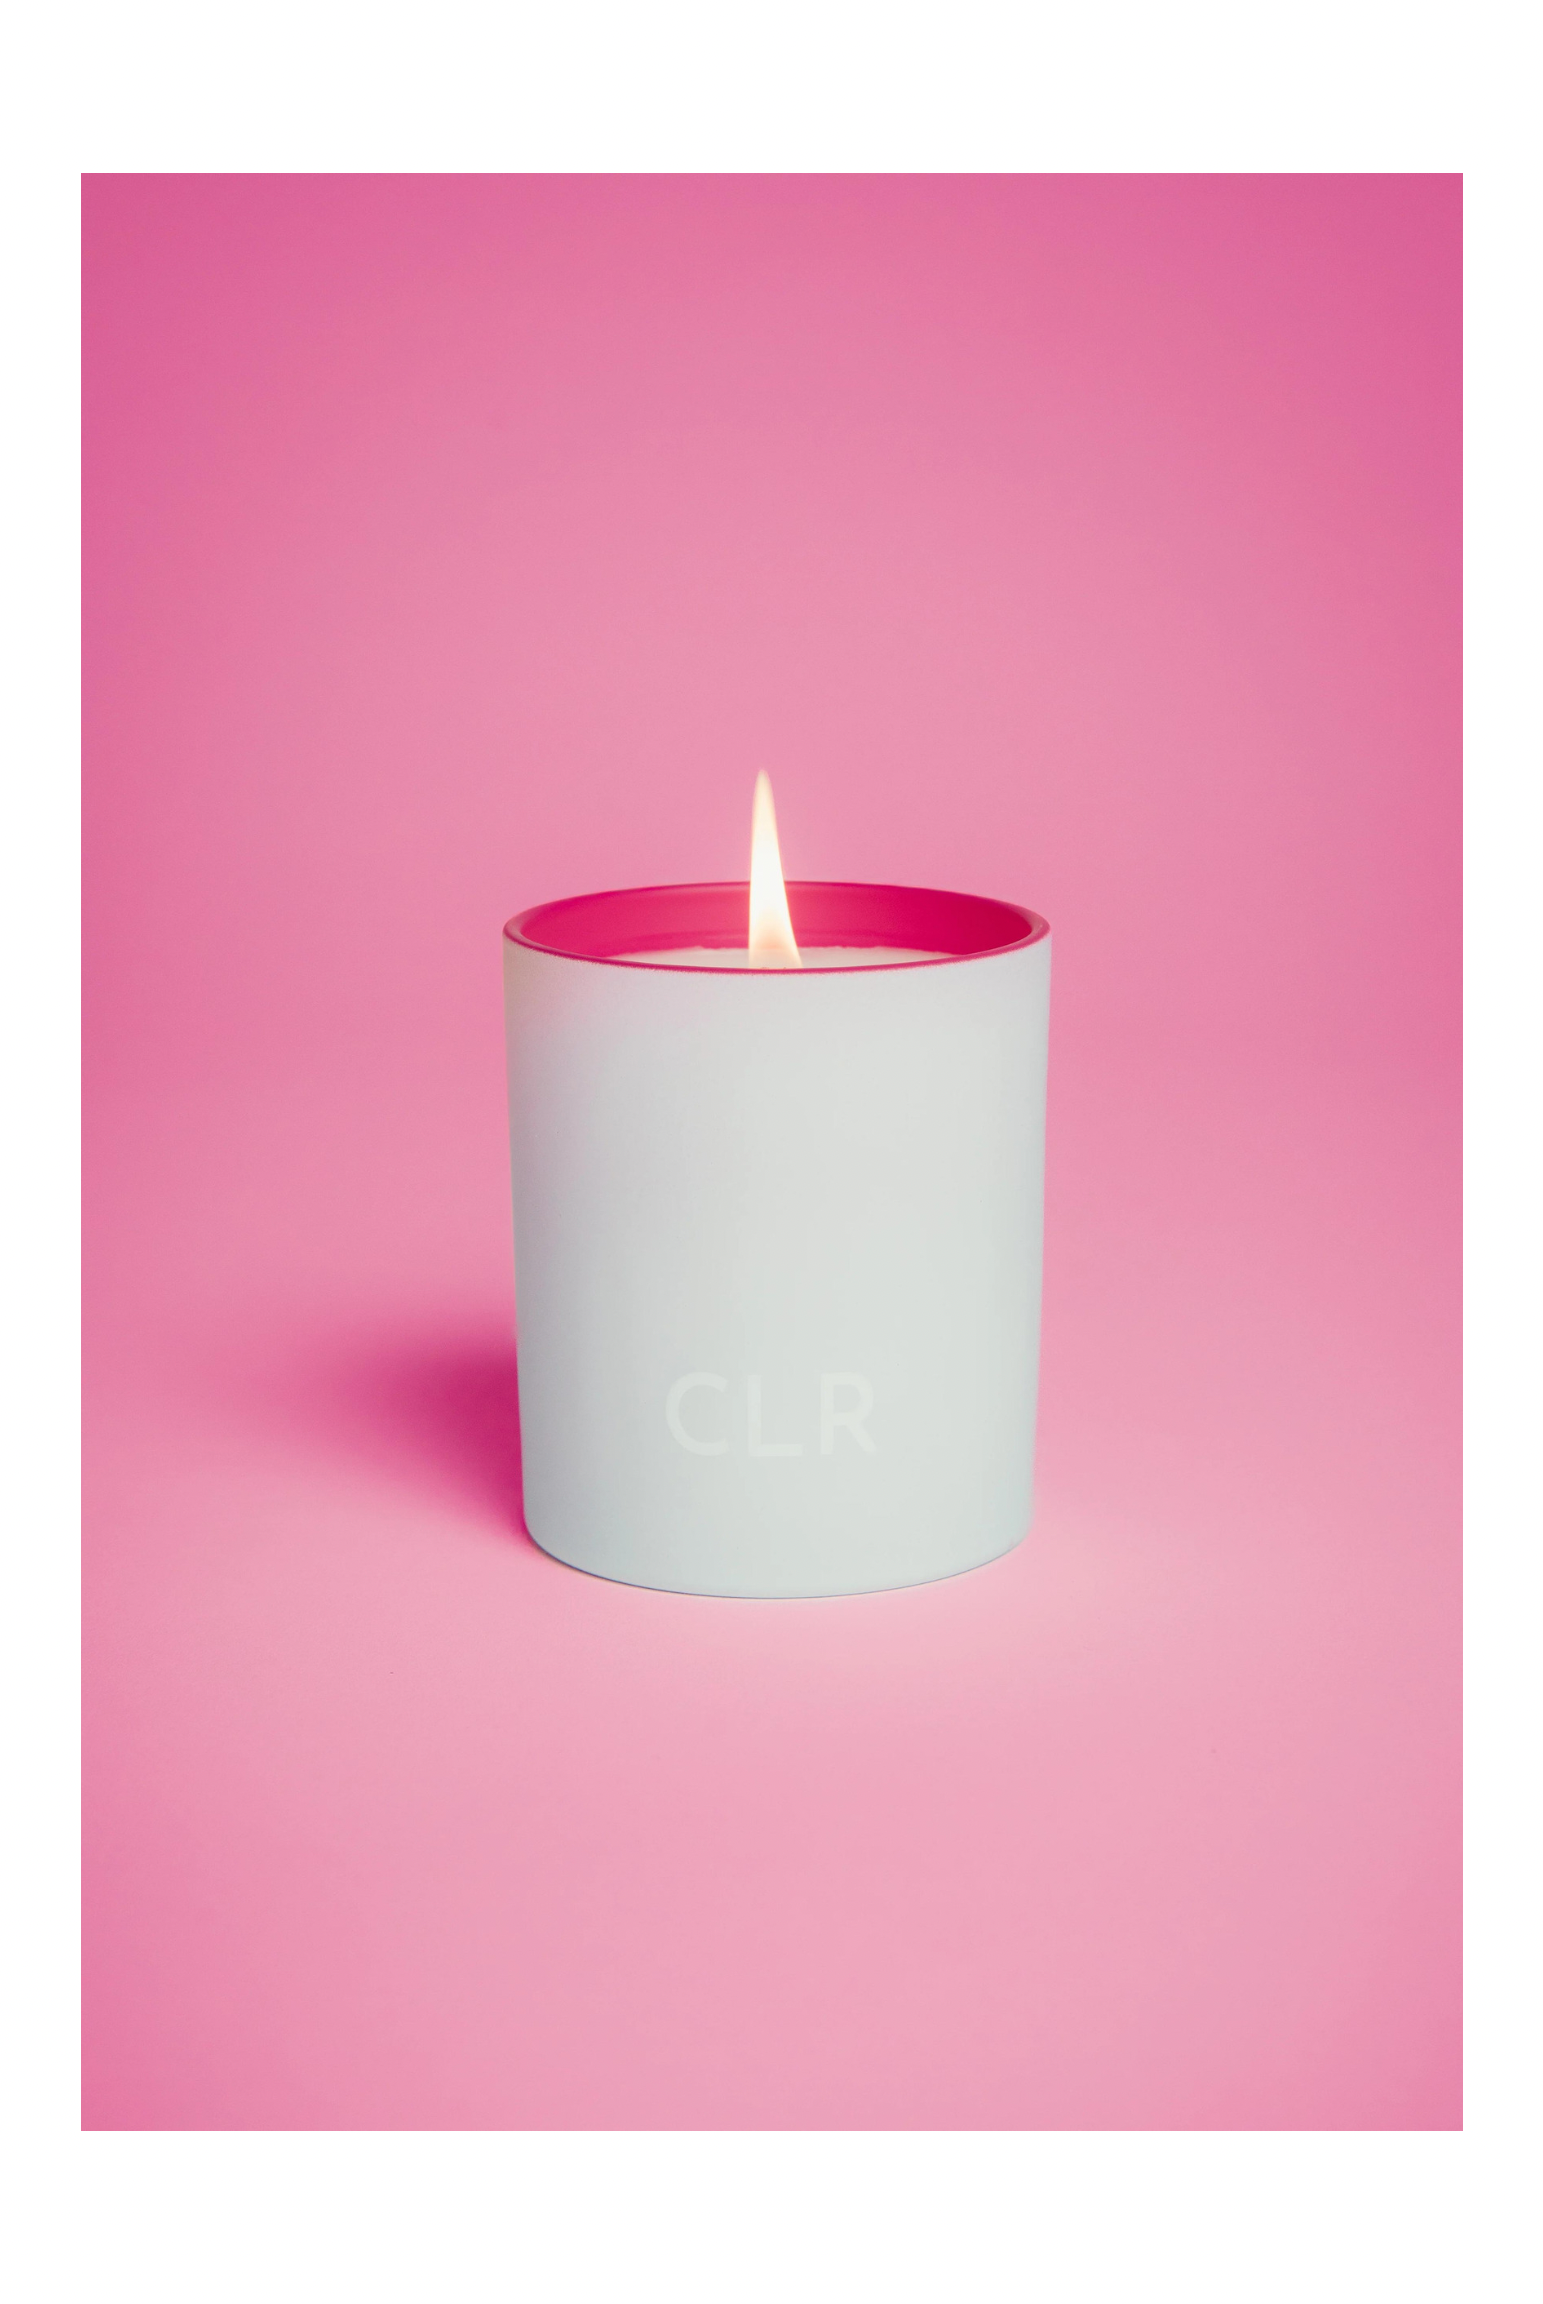 CLR Candle - Hot Pink - Elysian Couture